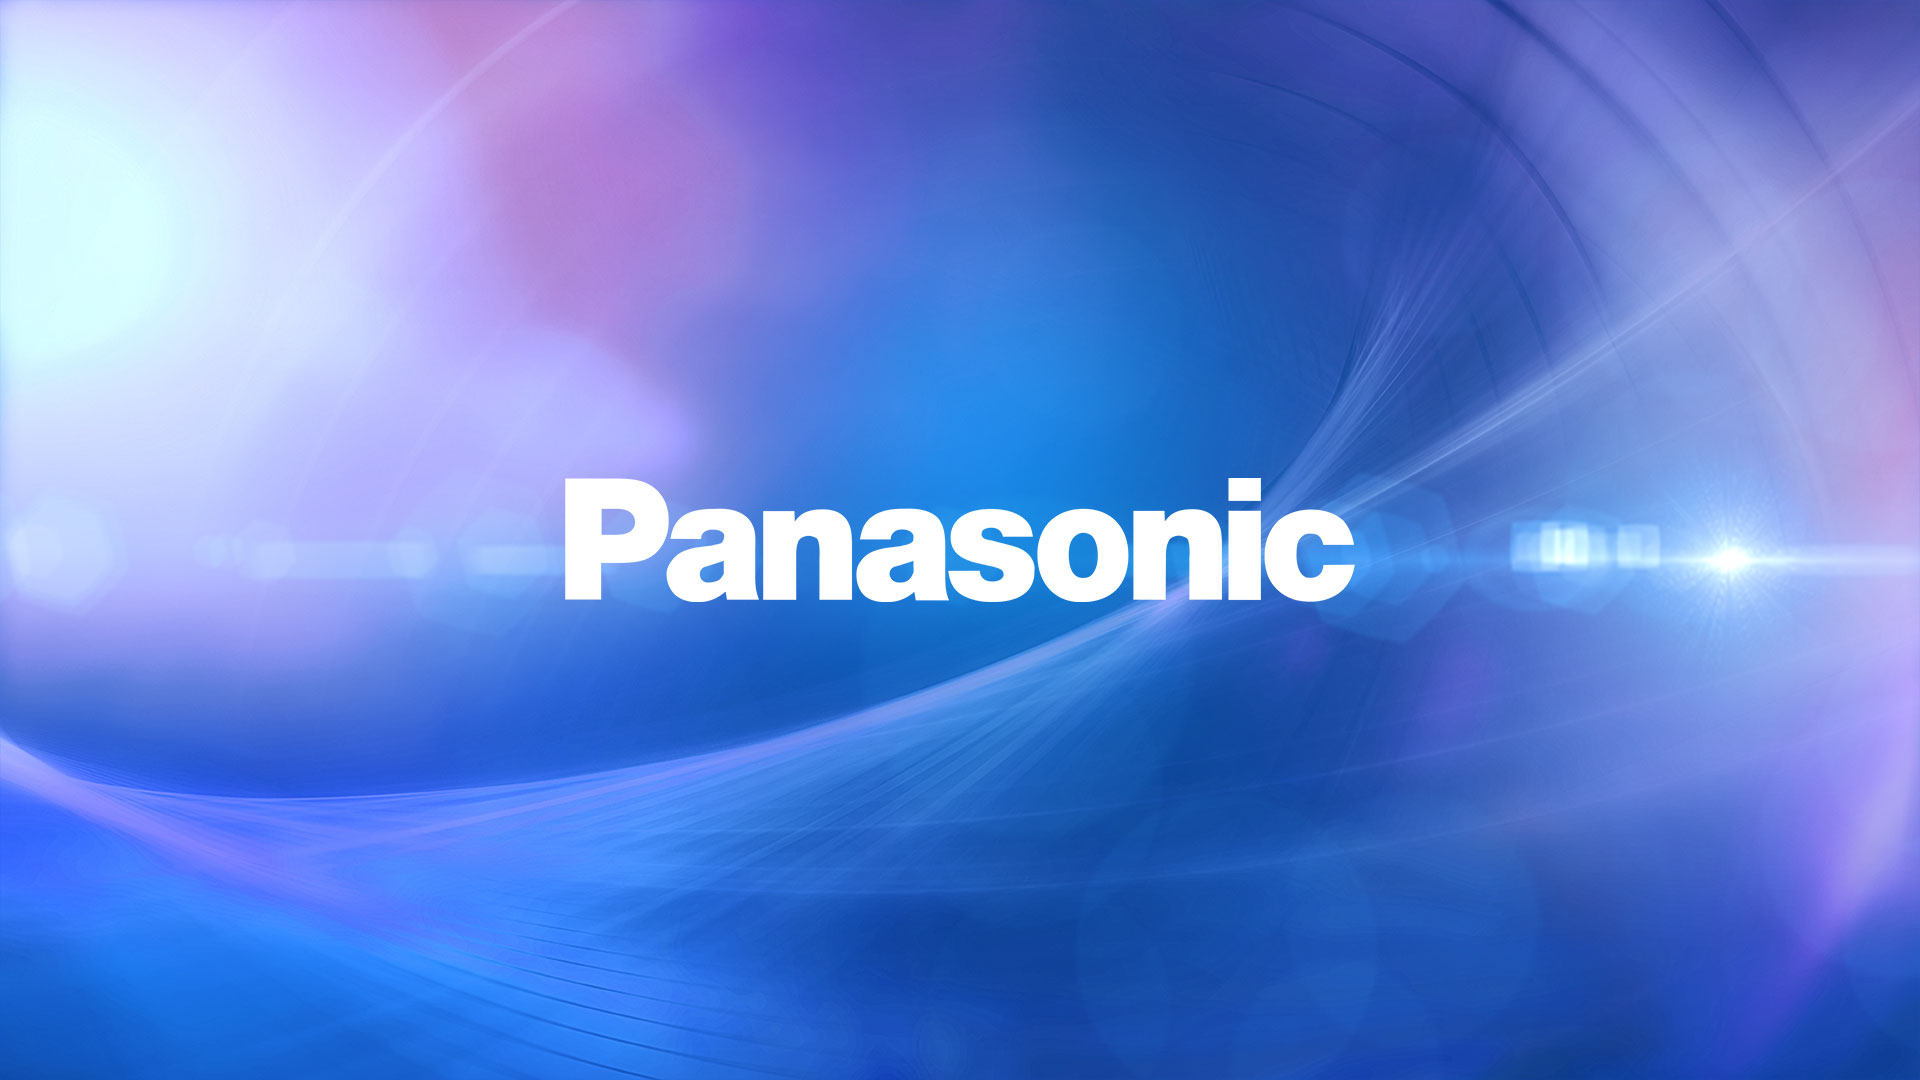 Panasonic Chooses Sfa Rse Eleader System To Increase Merchandising Efficiency In A Modern Channel Eleader News